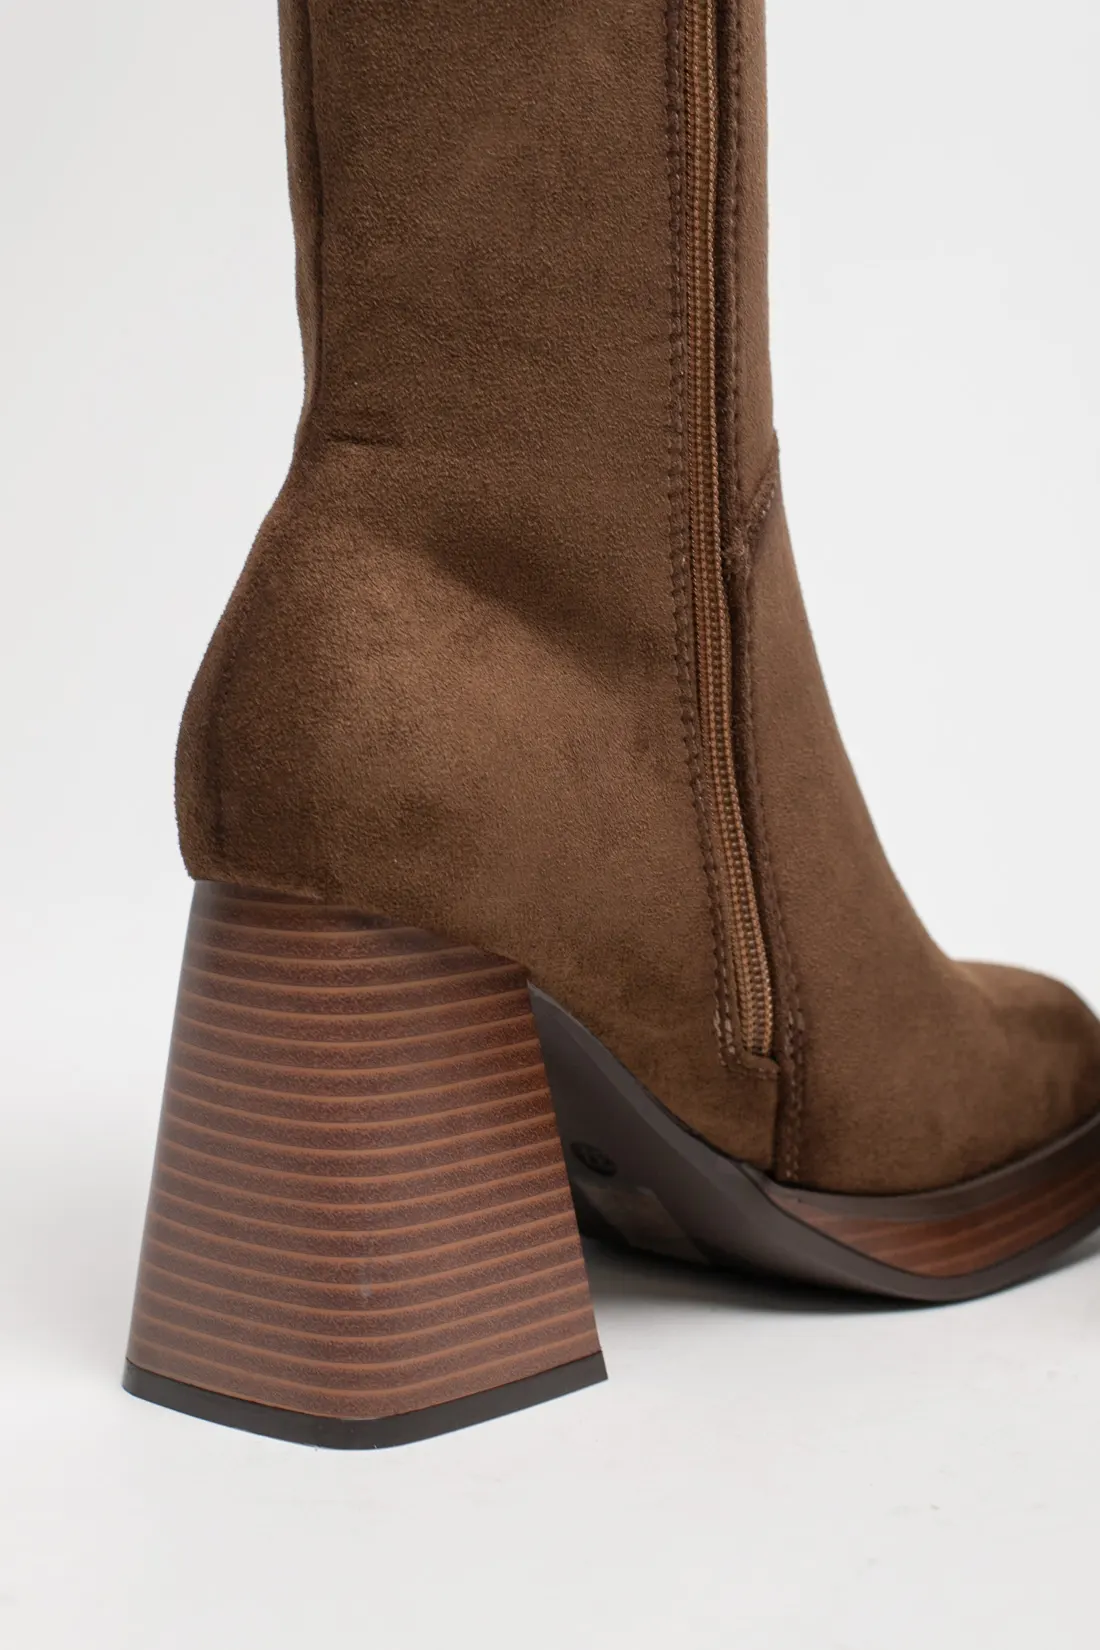 GIVEN HIGH BOOT - TAUPE